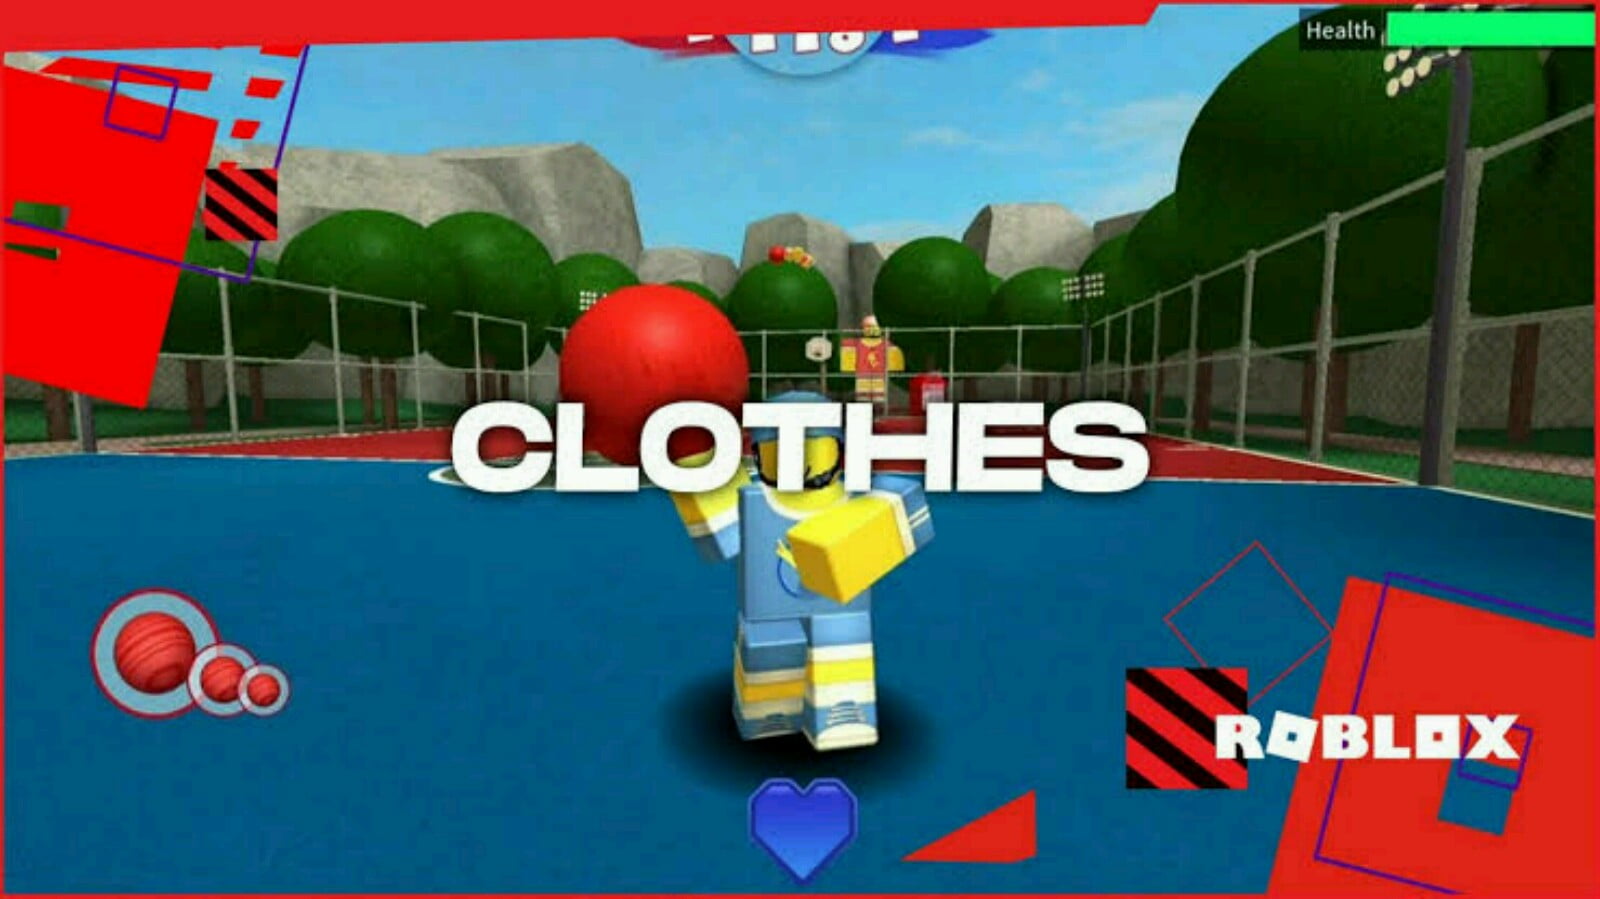 How To Make Clothes On Roblox Jealous Computers - roblox creating games how to give admin